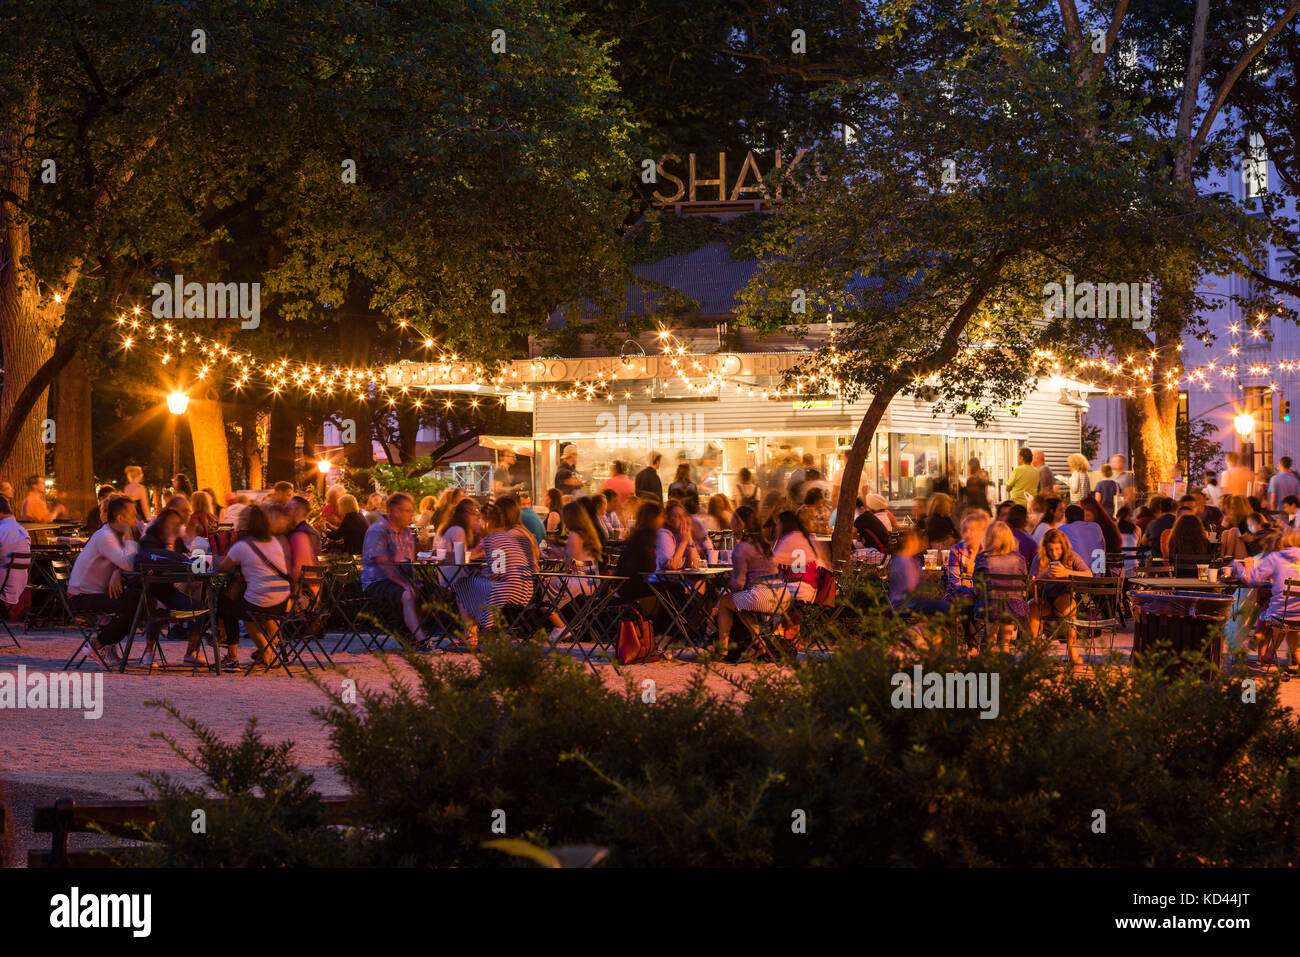 A summer evening at Shake Shack in Madison Square Park. Midtown, Manhattan, New York City Stock Photo